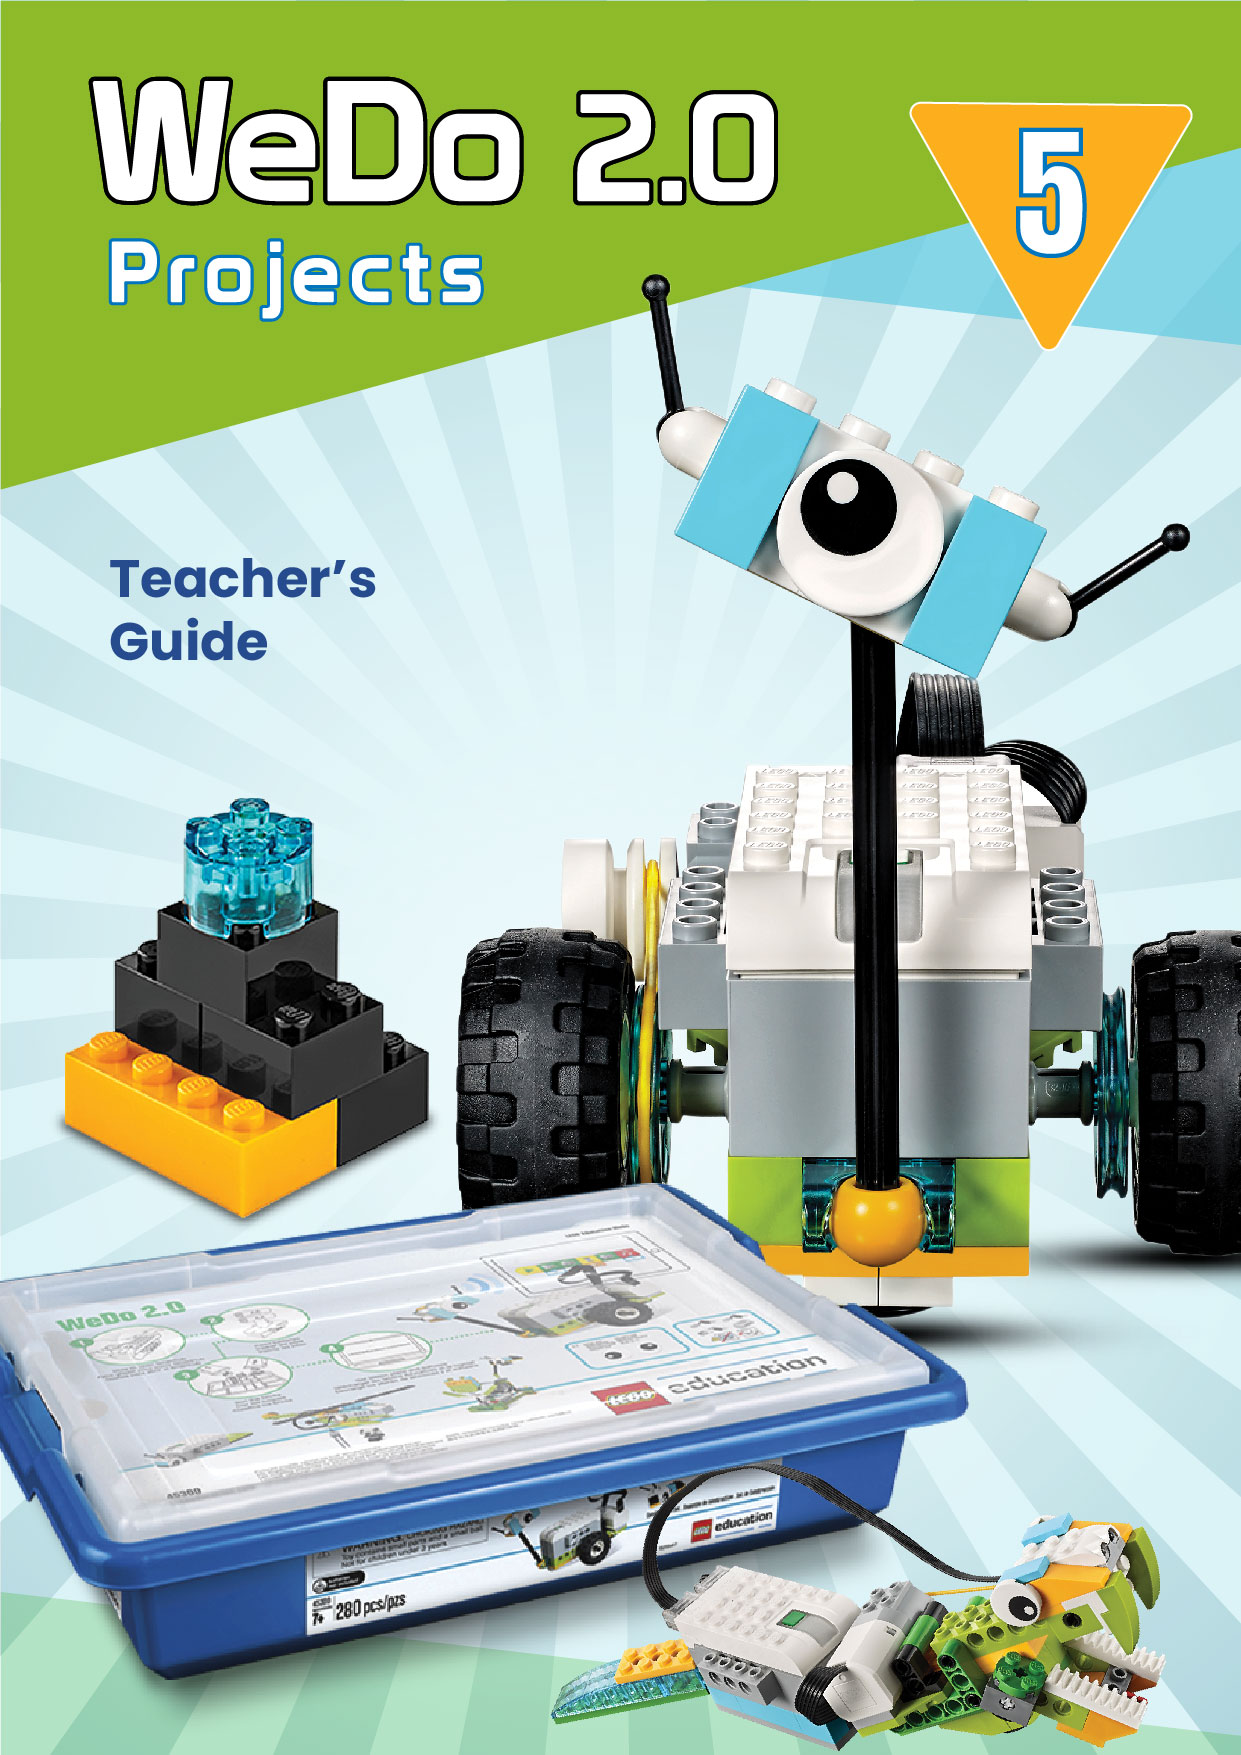 WeDo 2.0 Projects